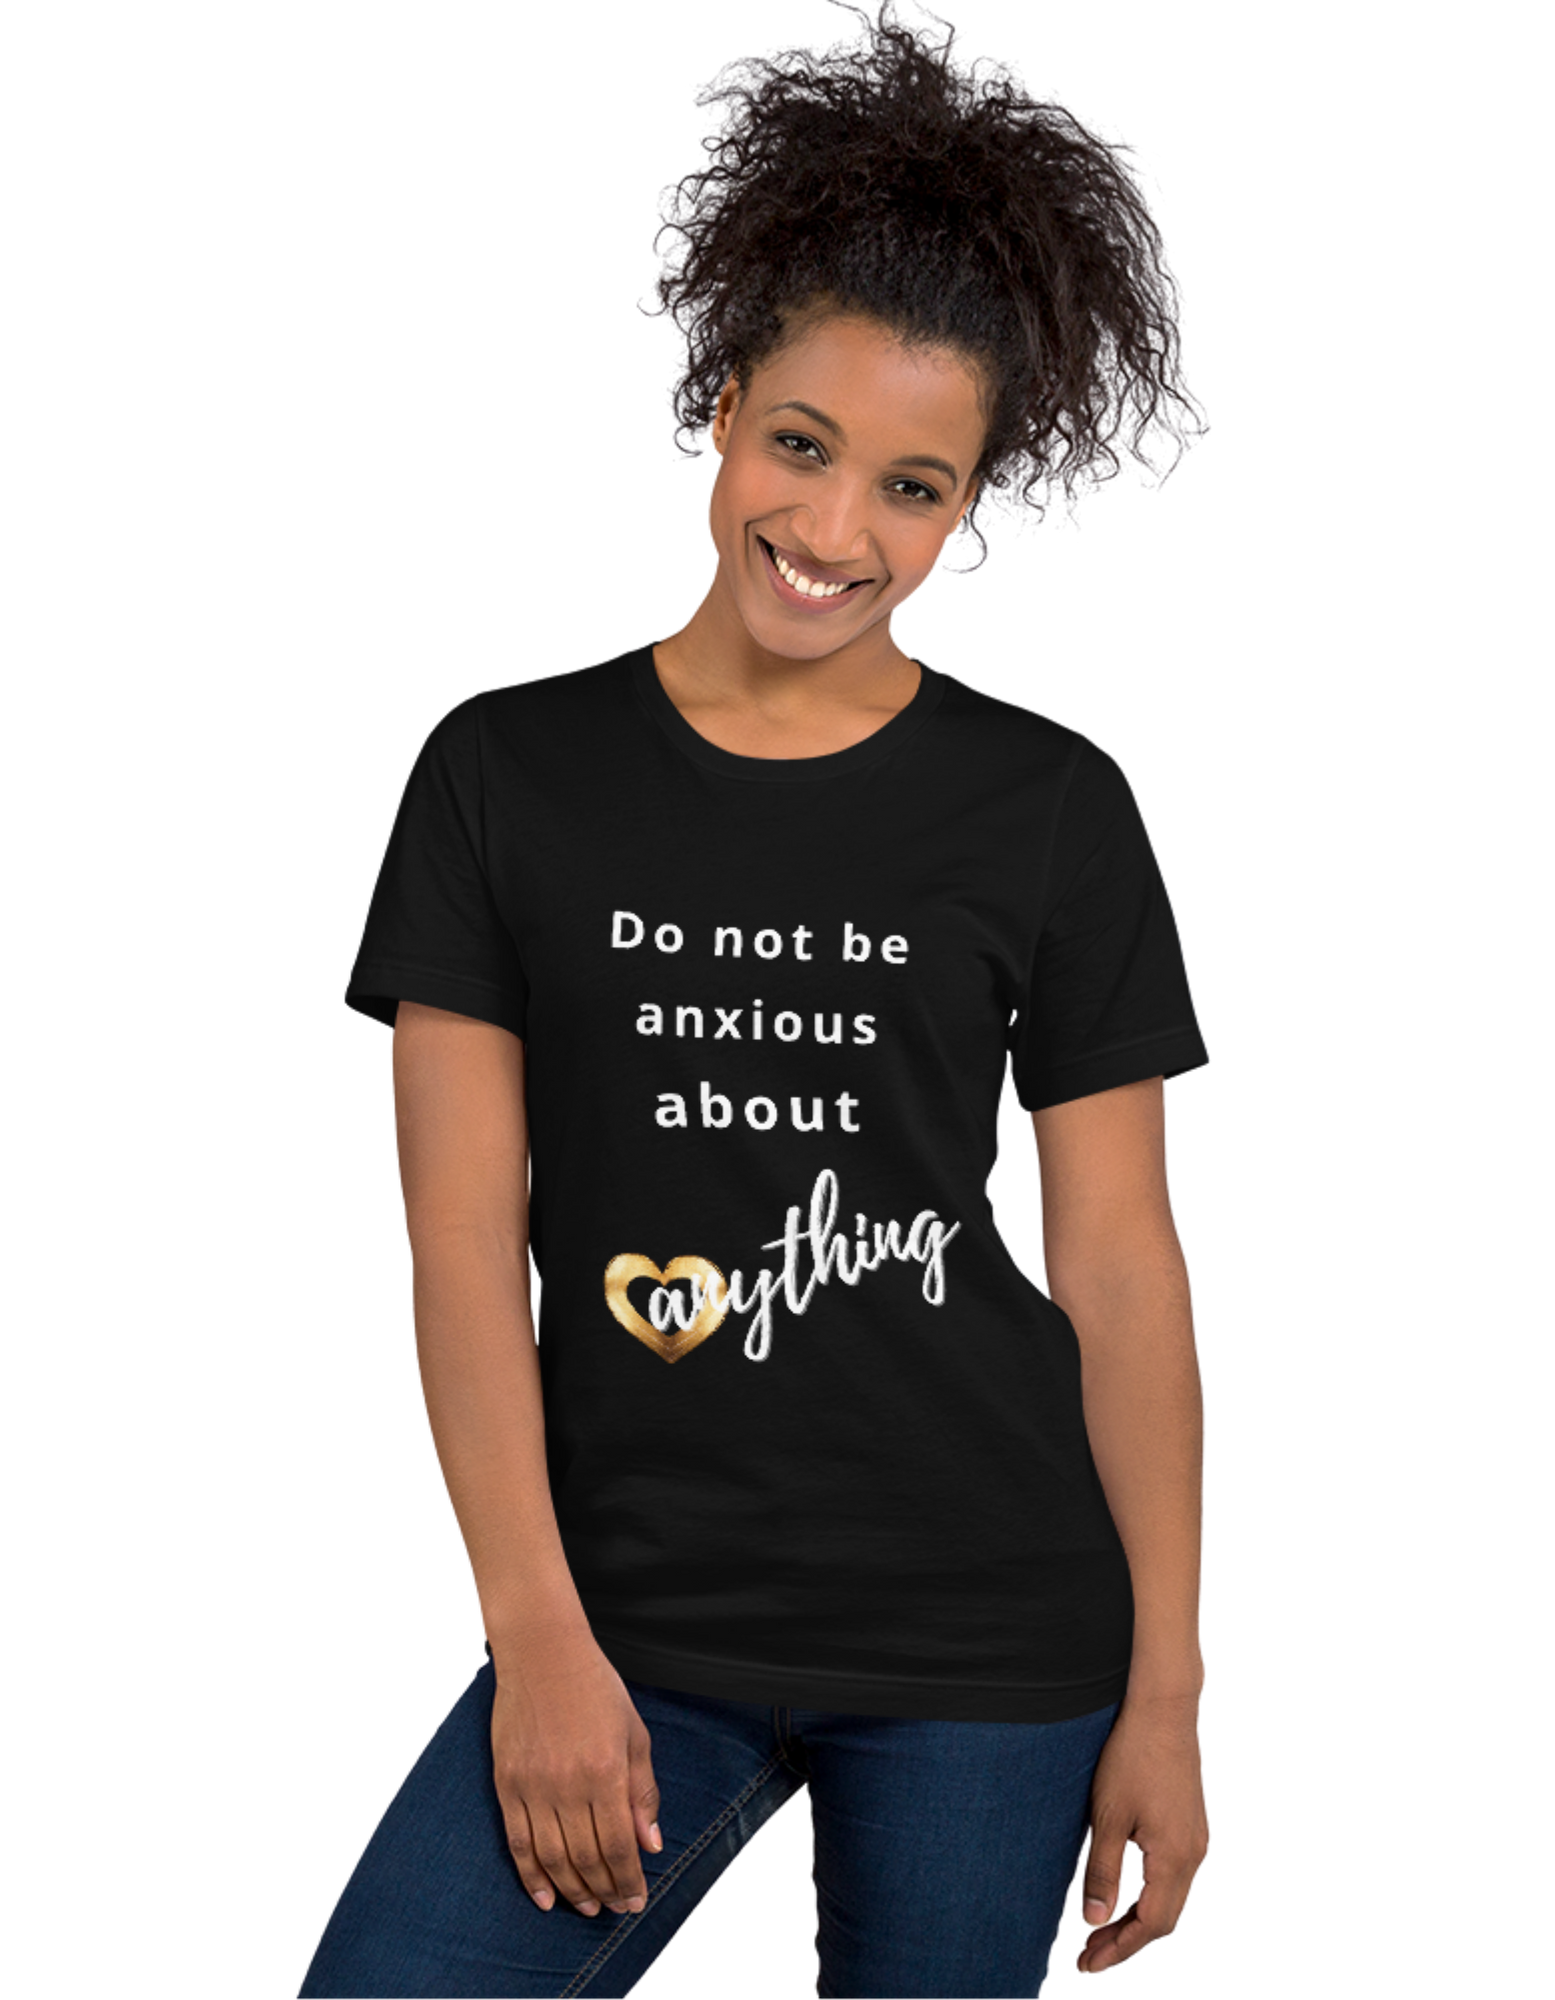 Do not be anxious about anything - Tee - Black / XS In His presence